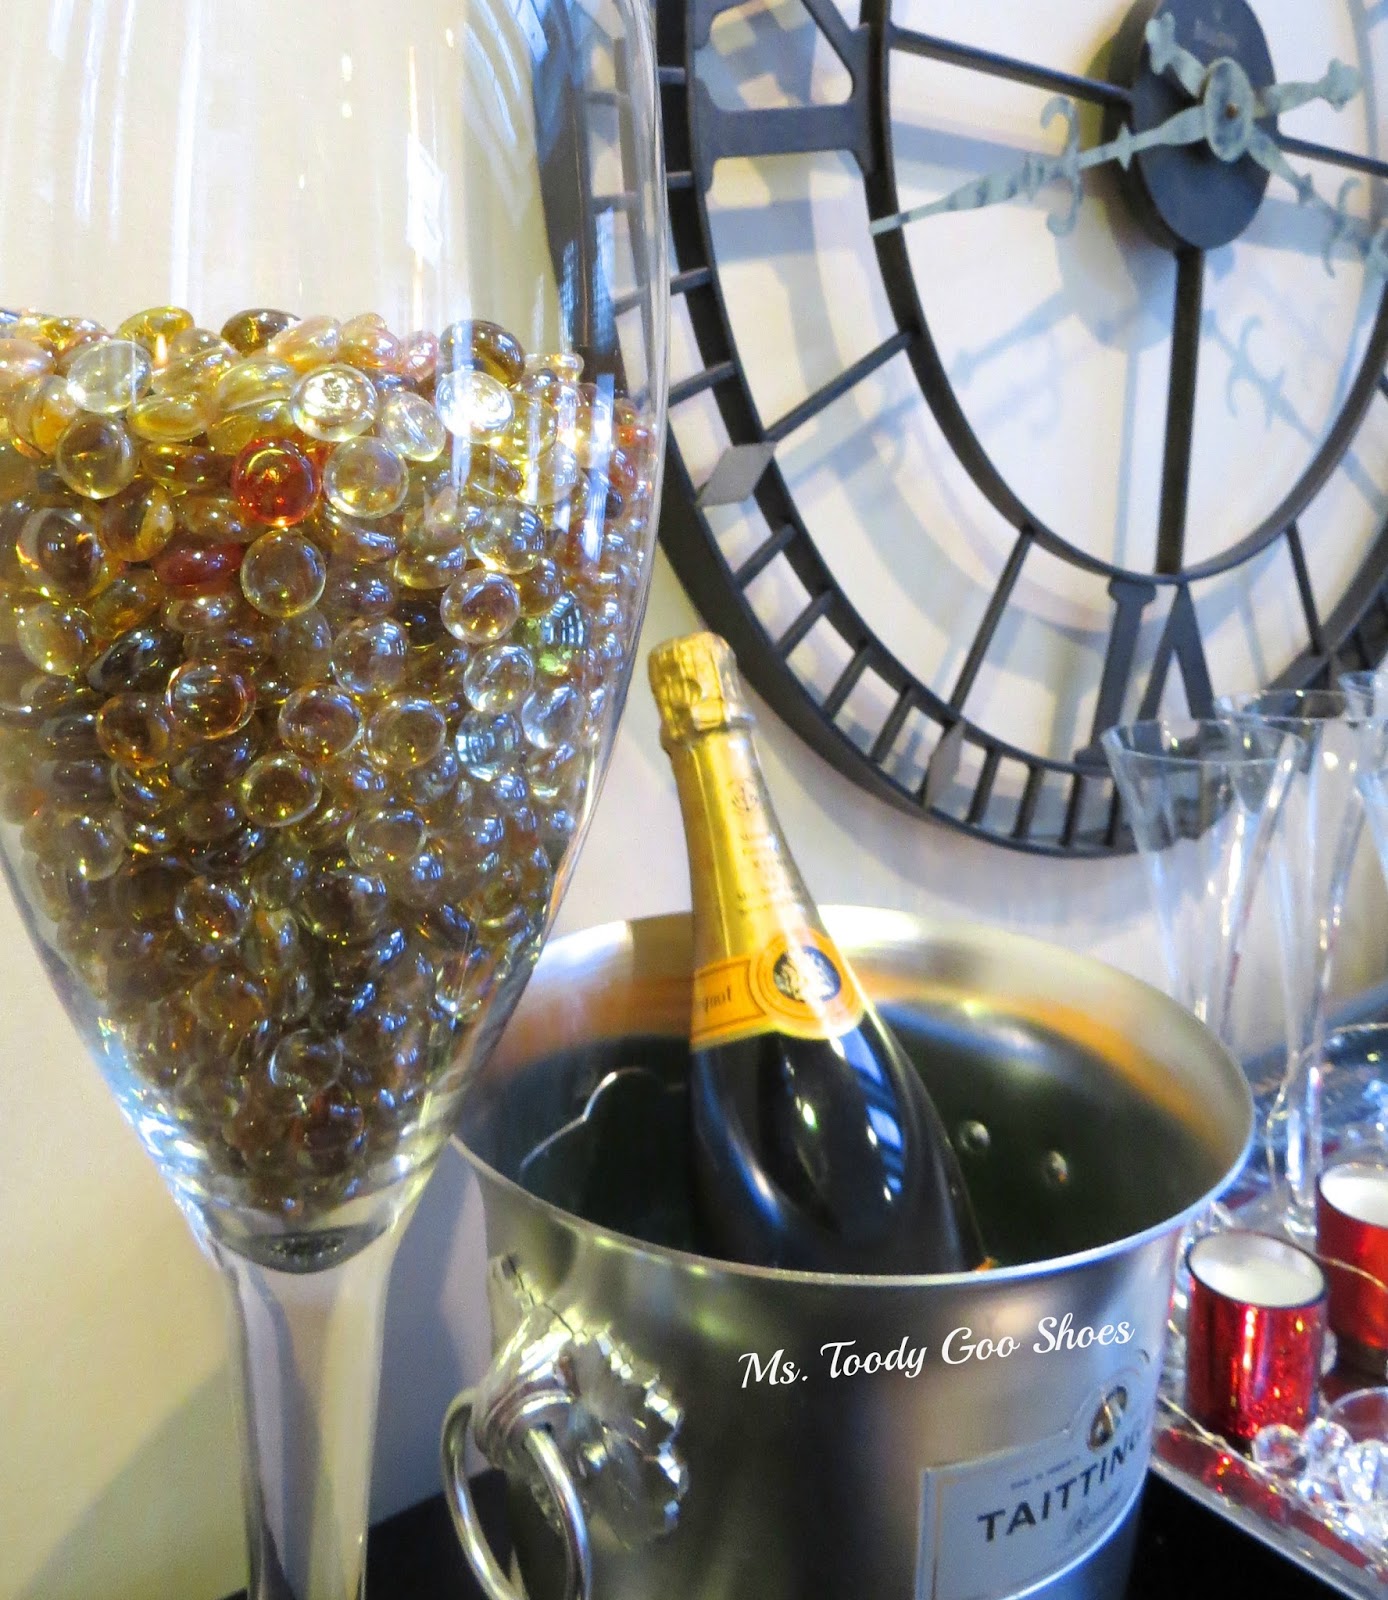 A "Bubbly" New Year's Eve Centerpiece that takes only 30 seconds to make!  --- by Ms. Toody Goo Shoes